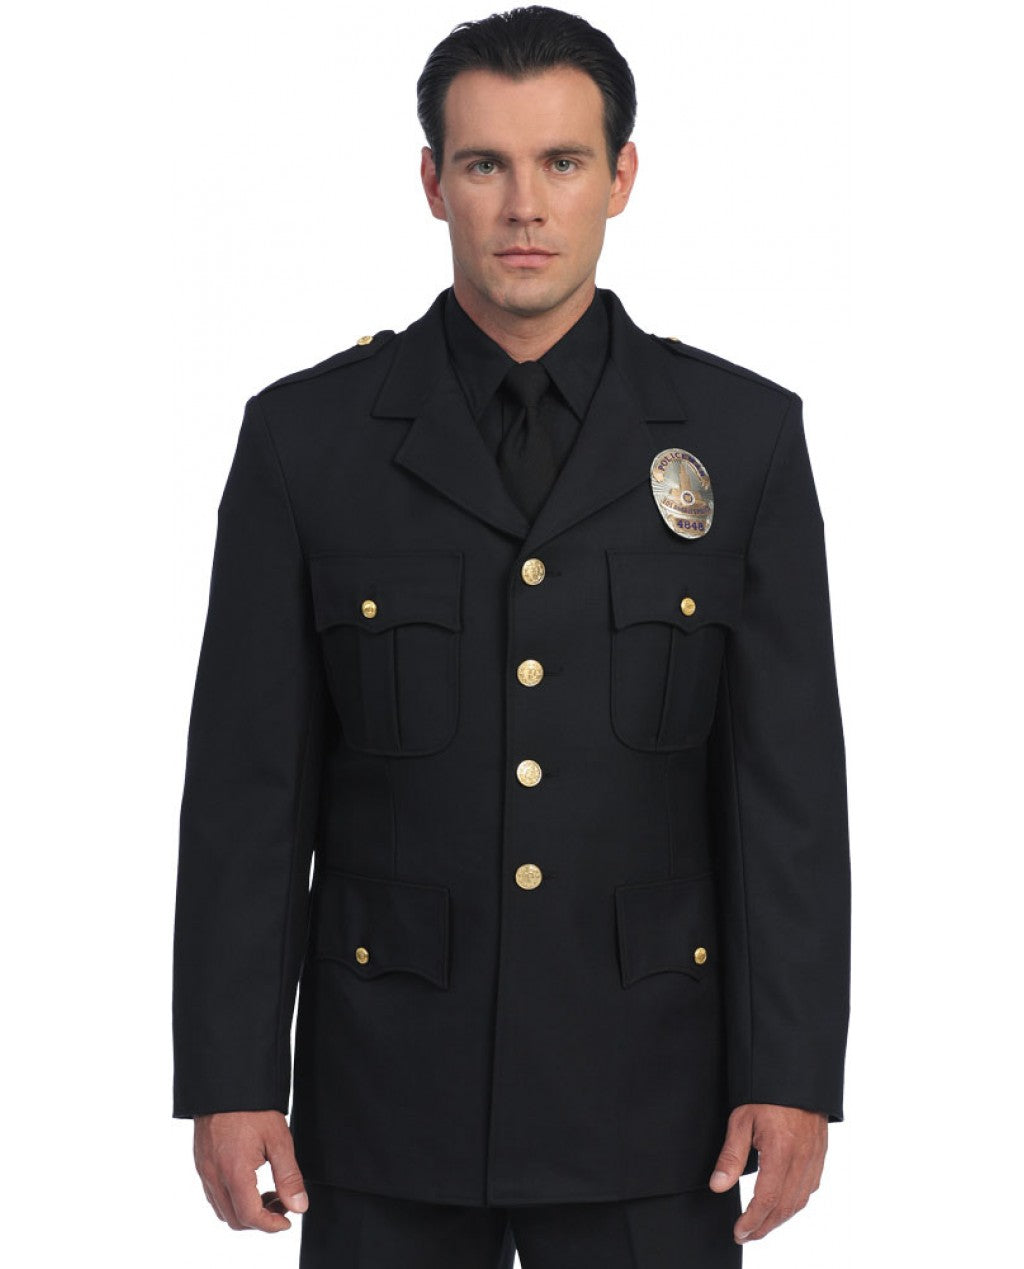 United Uniforms Single Breasted Class A Dress Coat - 55% Polyester / 45% Wool Elastique Weave